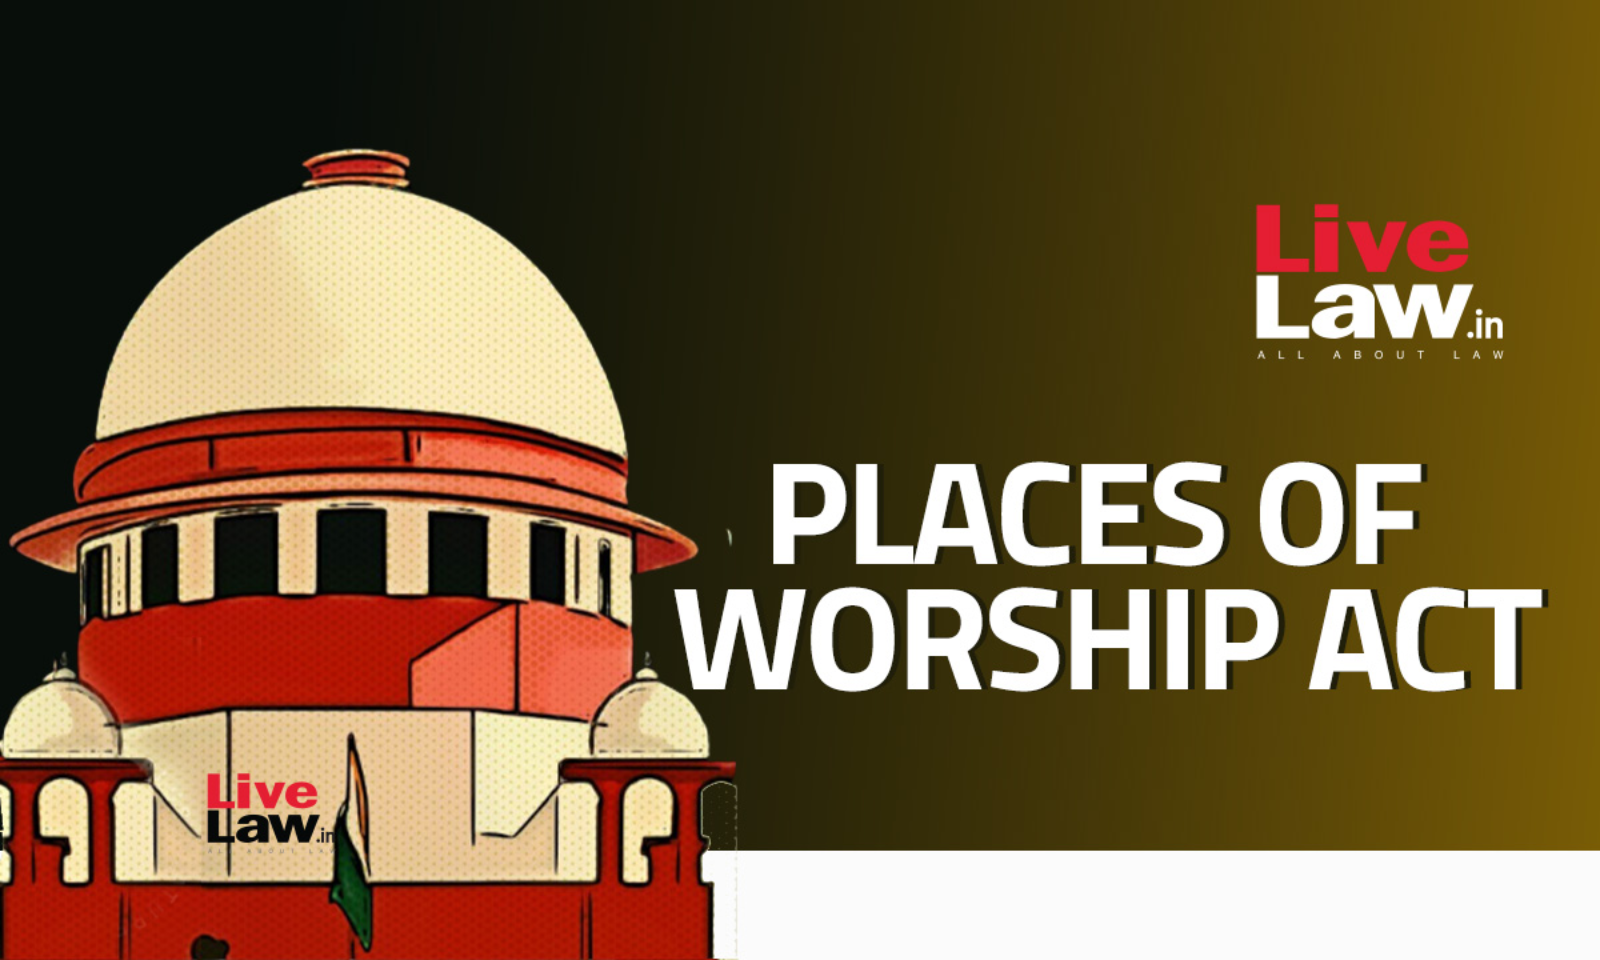 Supreme Court Asks Centre To File Counter-Affidavit In Petitions Challenging Places Of Worship Act By Dec 12